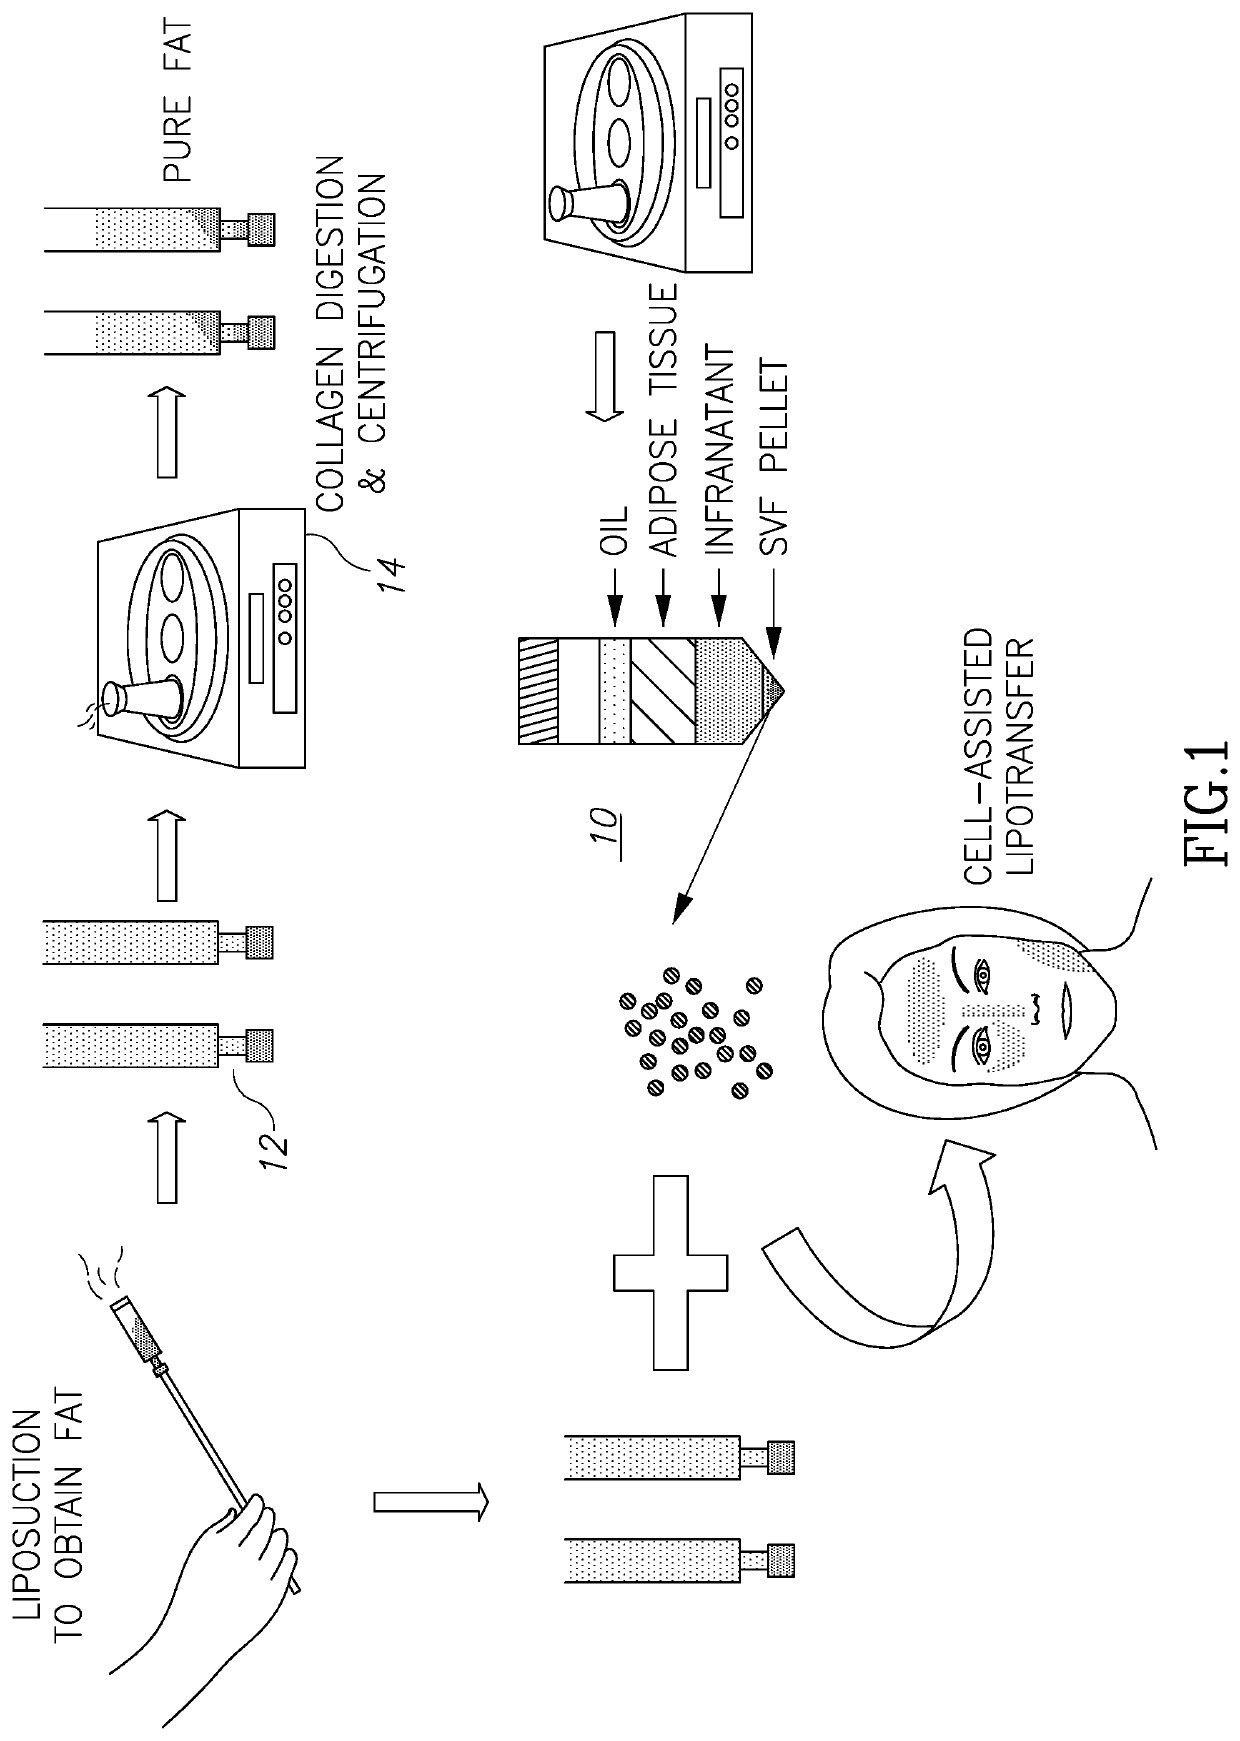 System and method for harvesting autologous adipose tissue